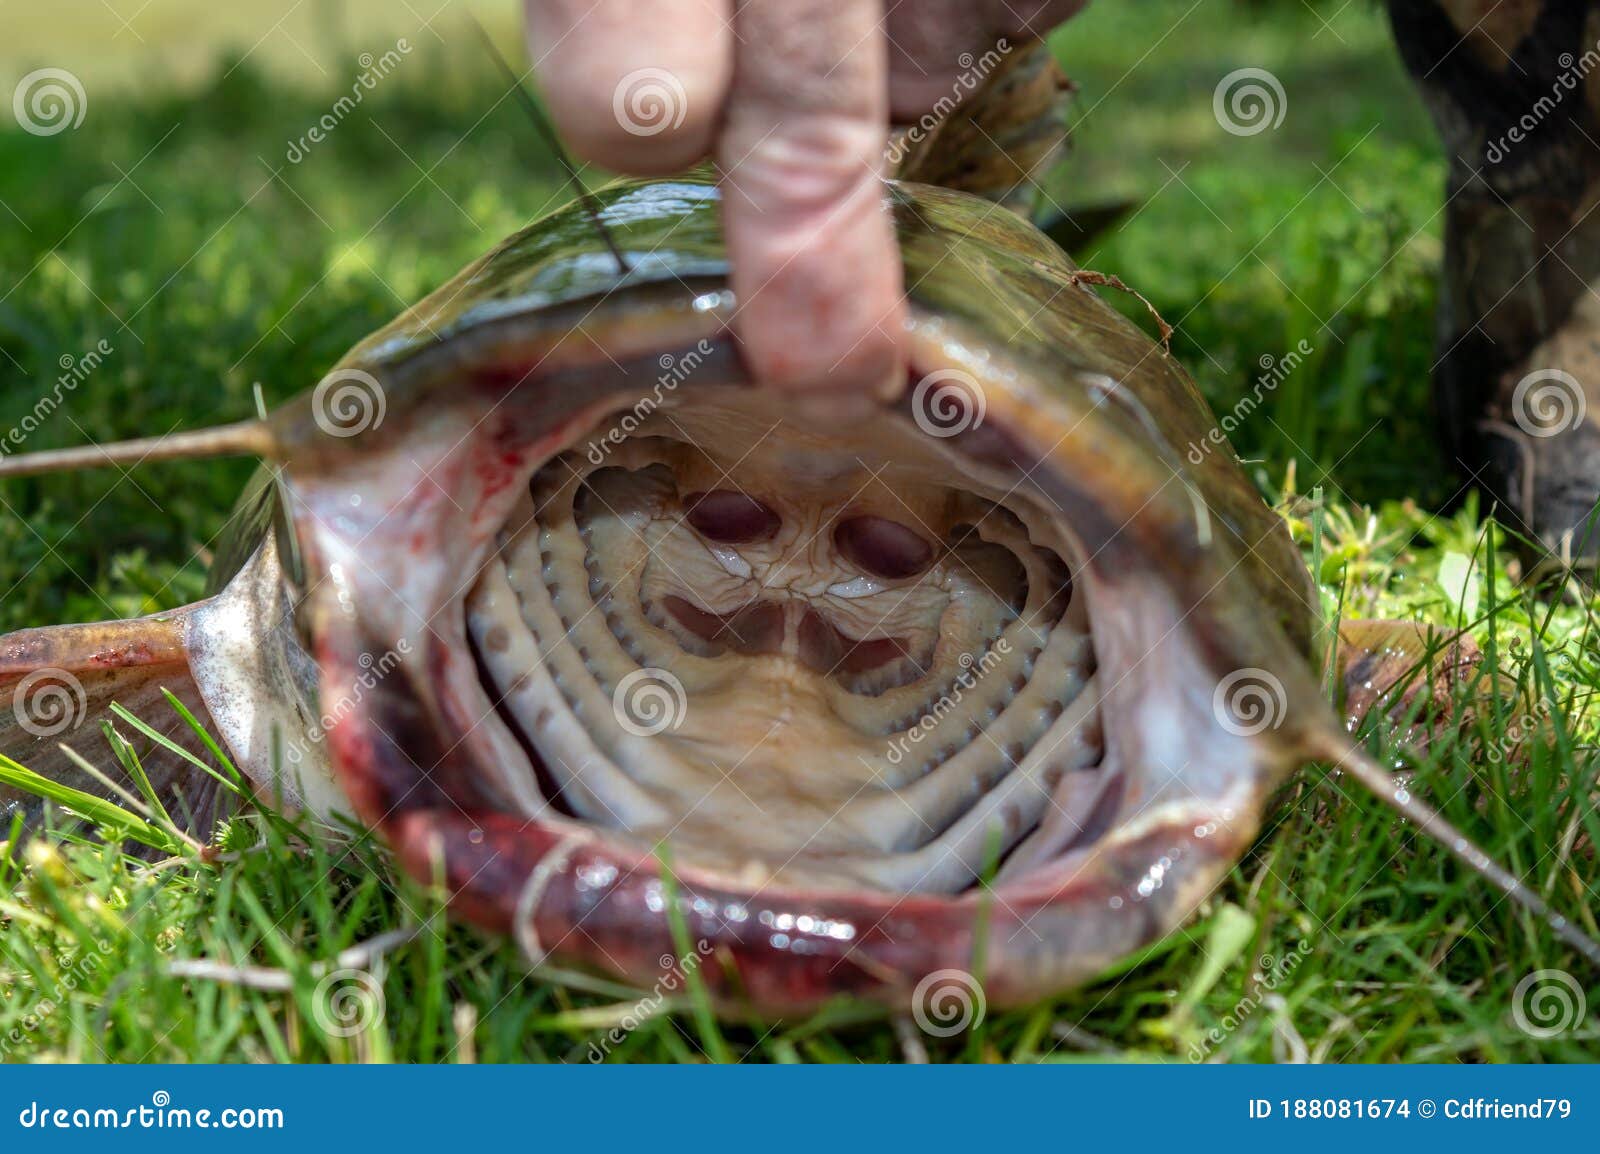 Deep Inside the Mouth of a Catfish Stock Photo - Image of fingers